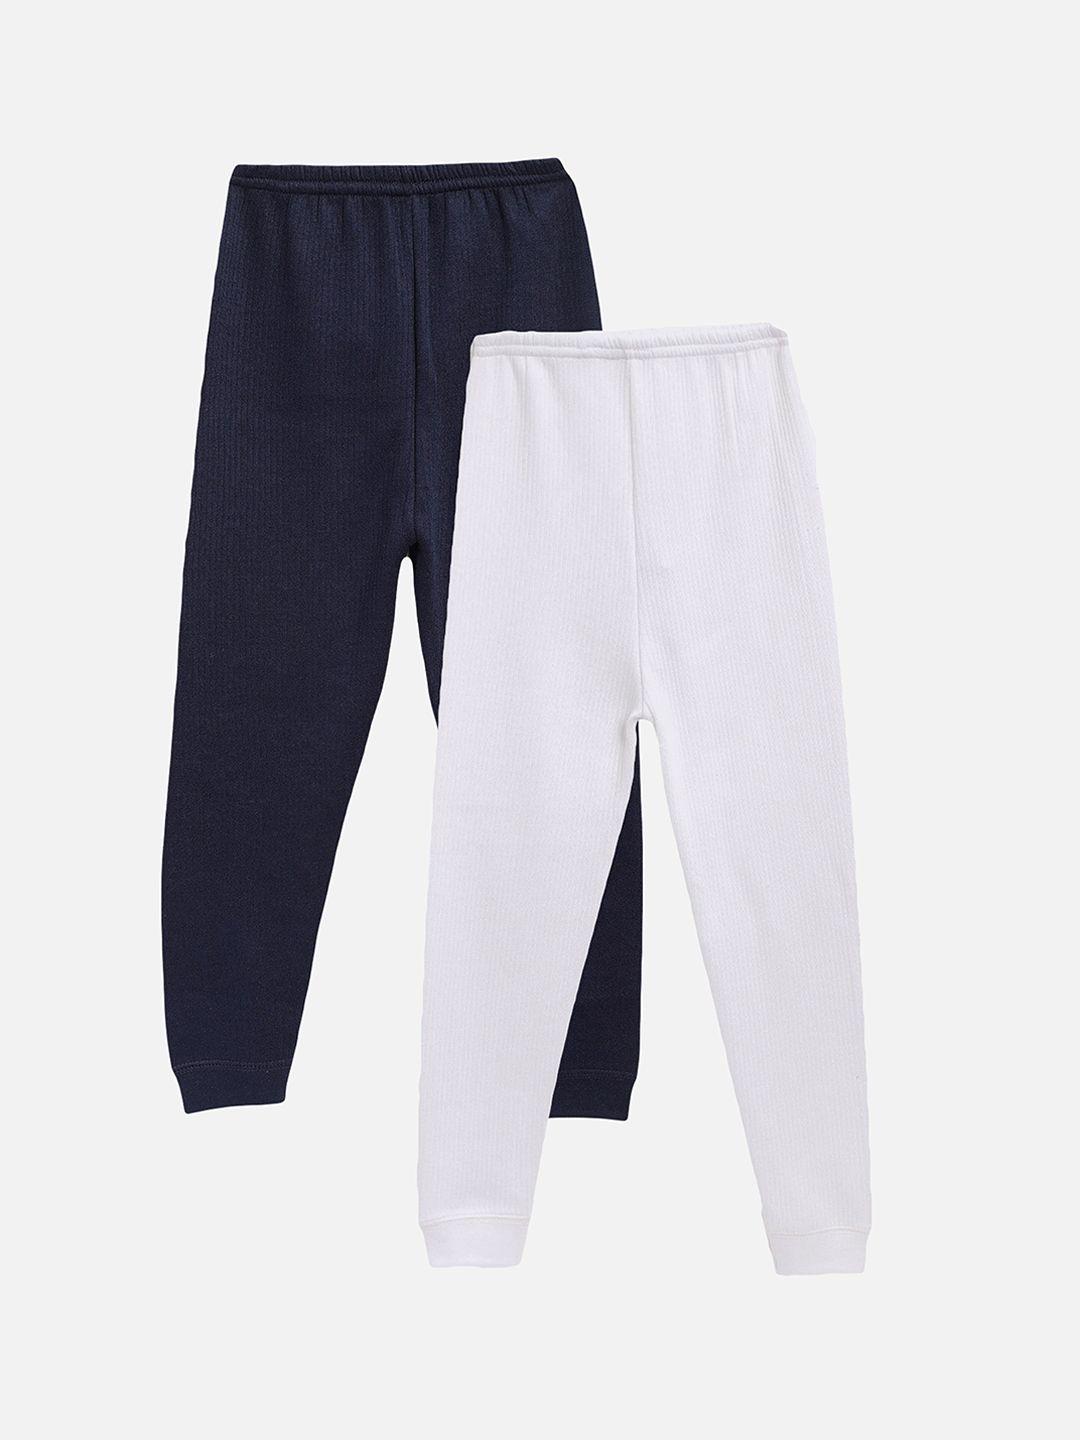 kanvin boys  pack of 2 navy blue & white  solid thermal bottoms